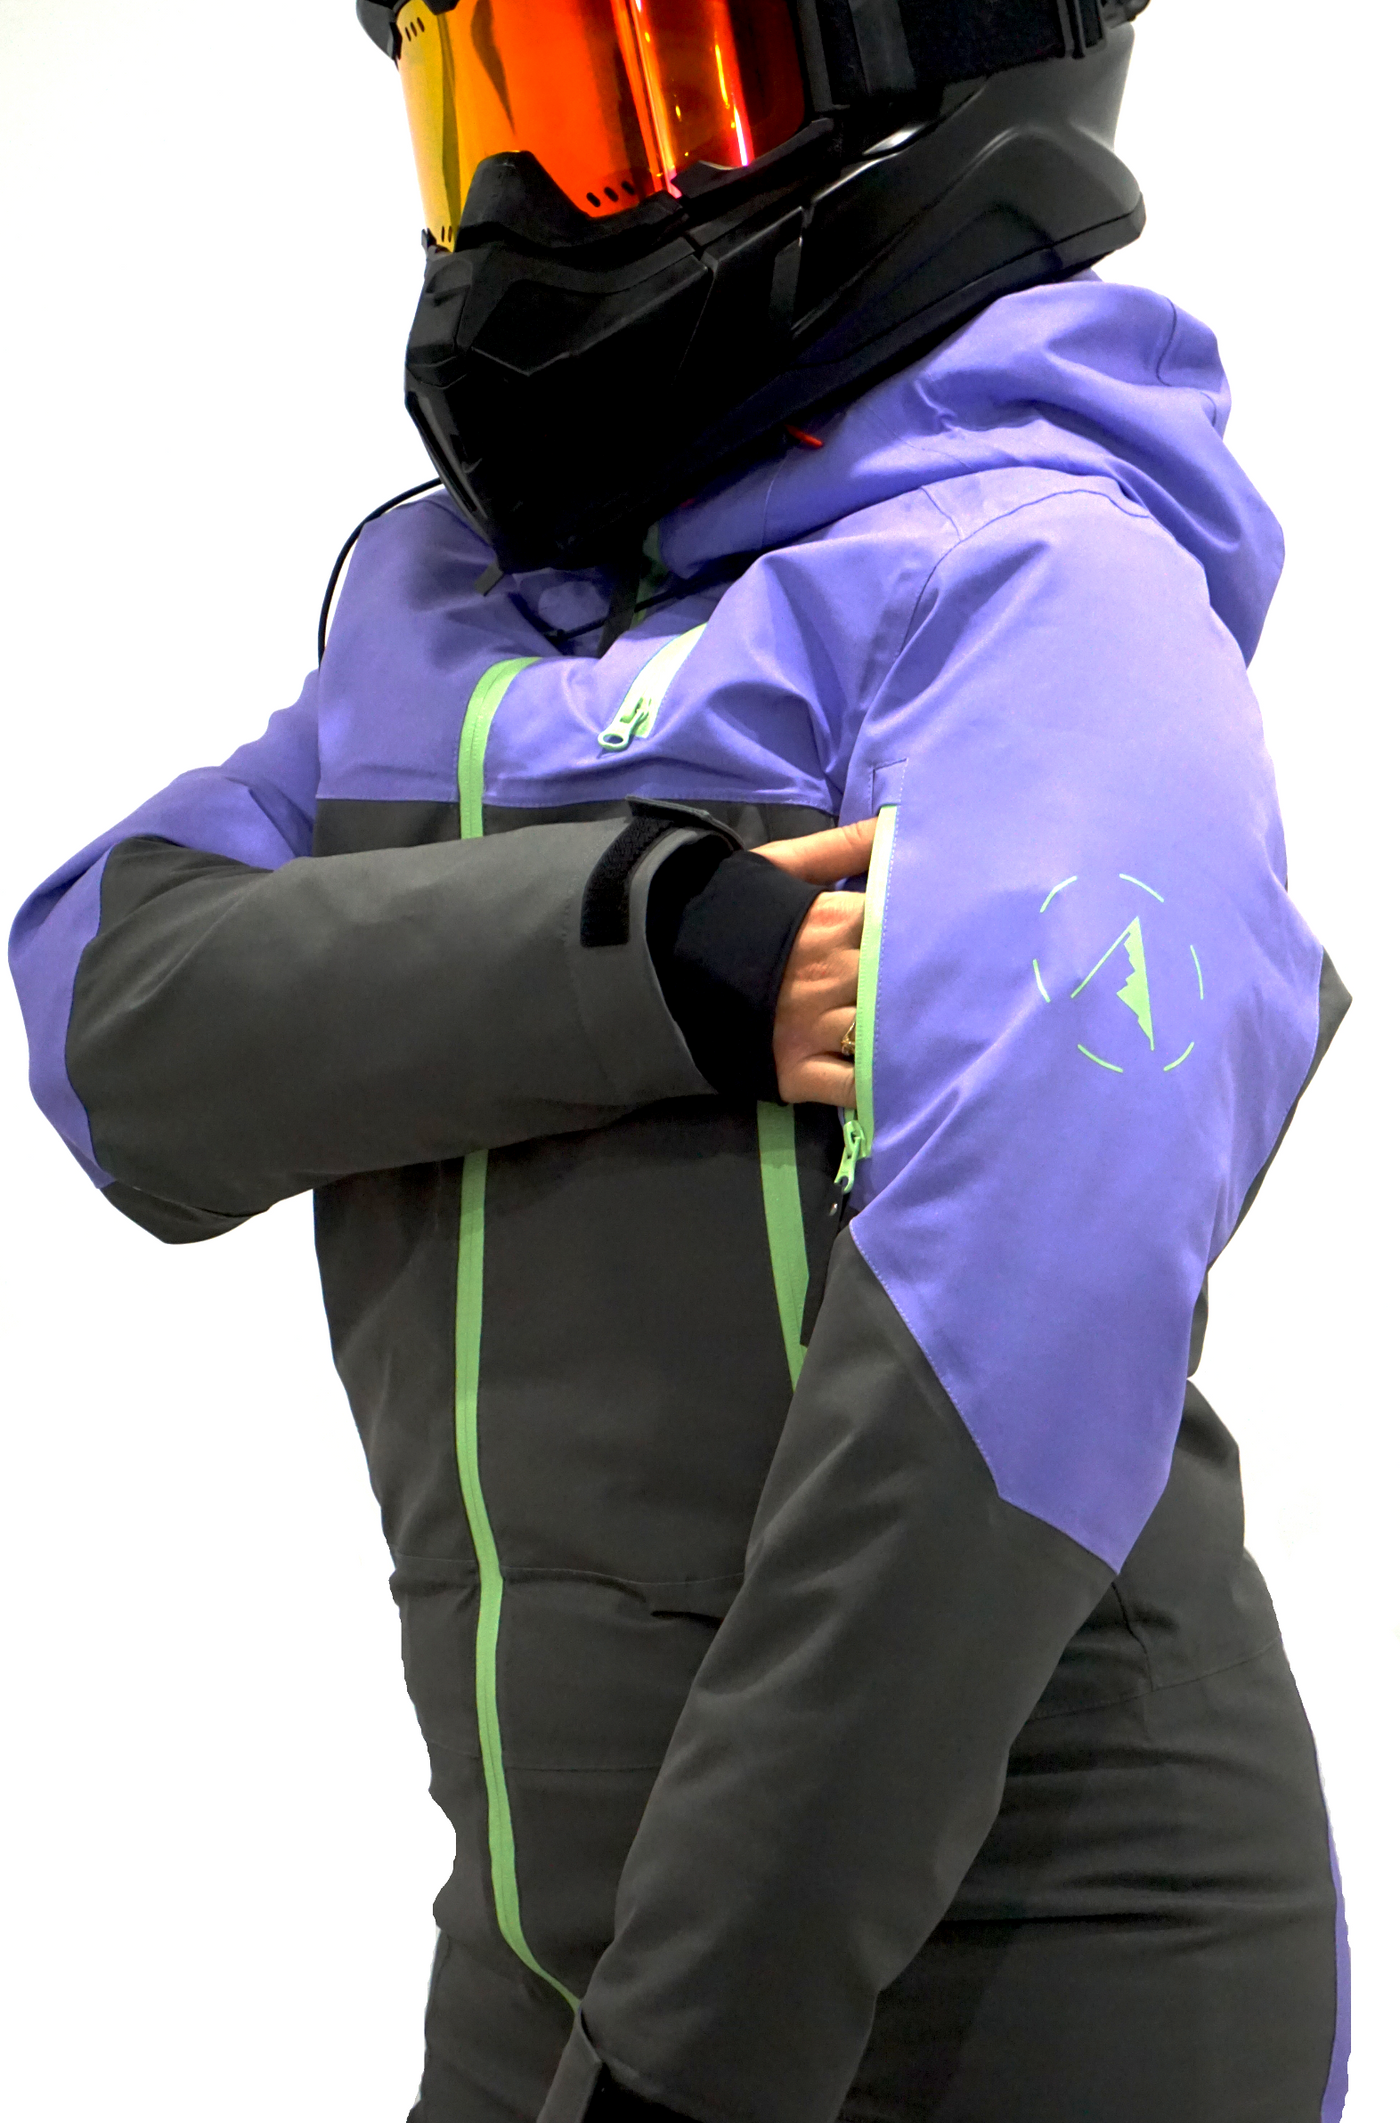 Monosuit W23 - Gray and Purple Insulated